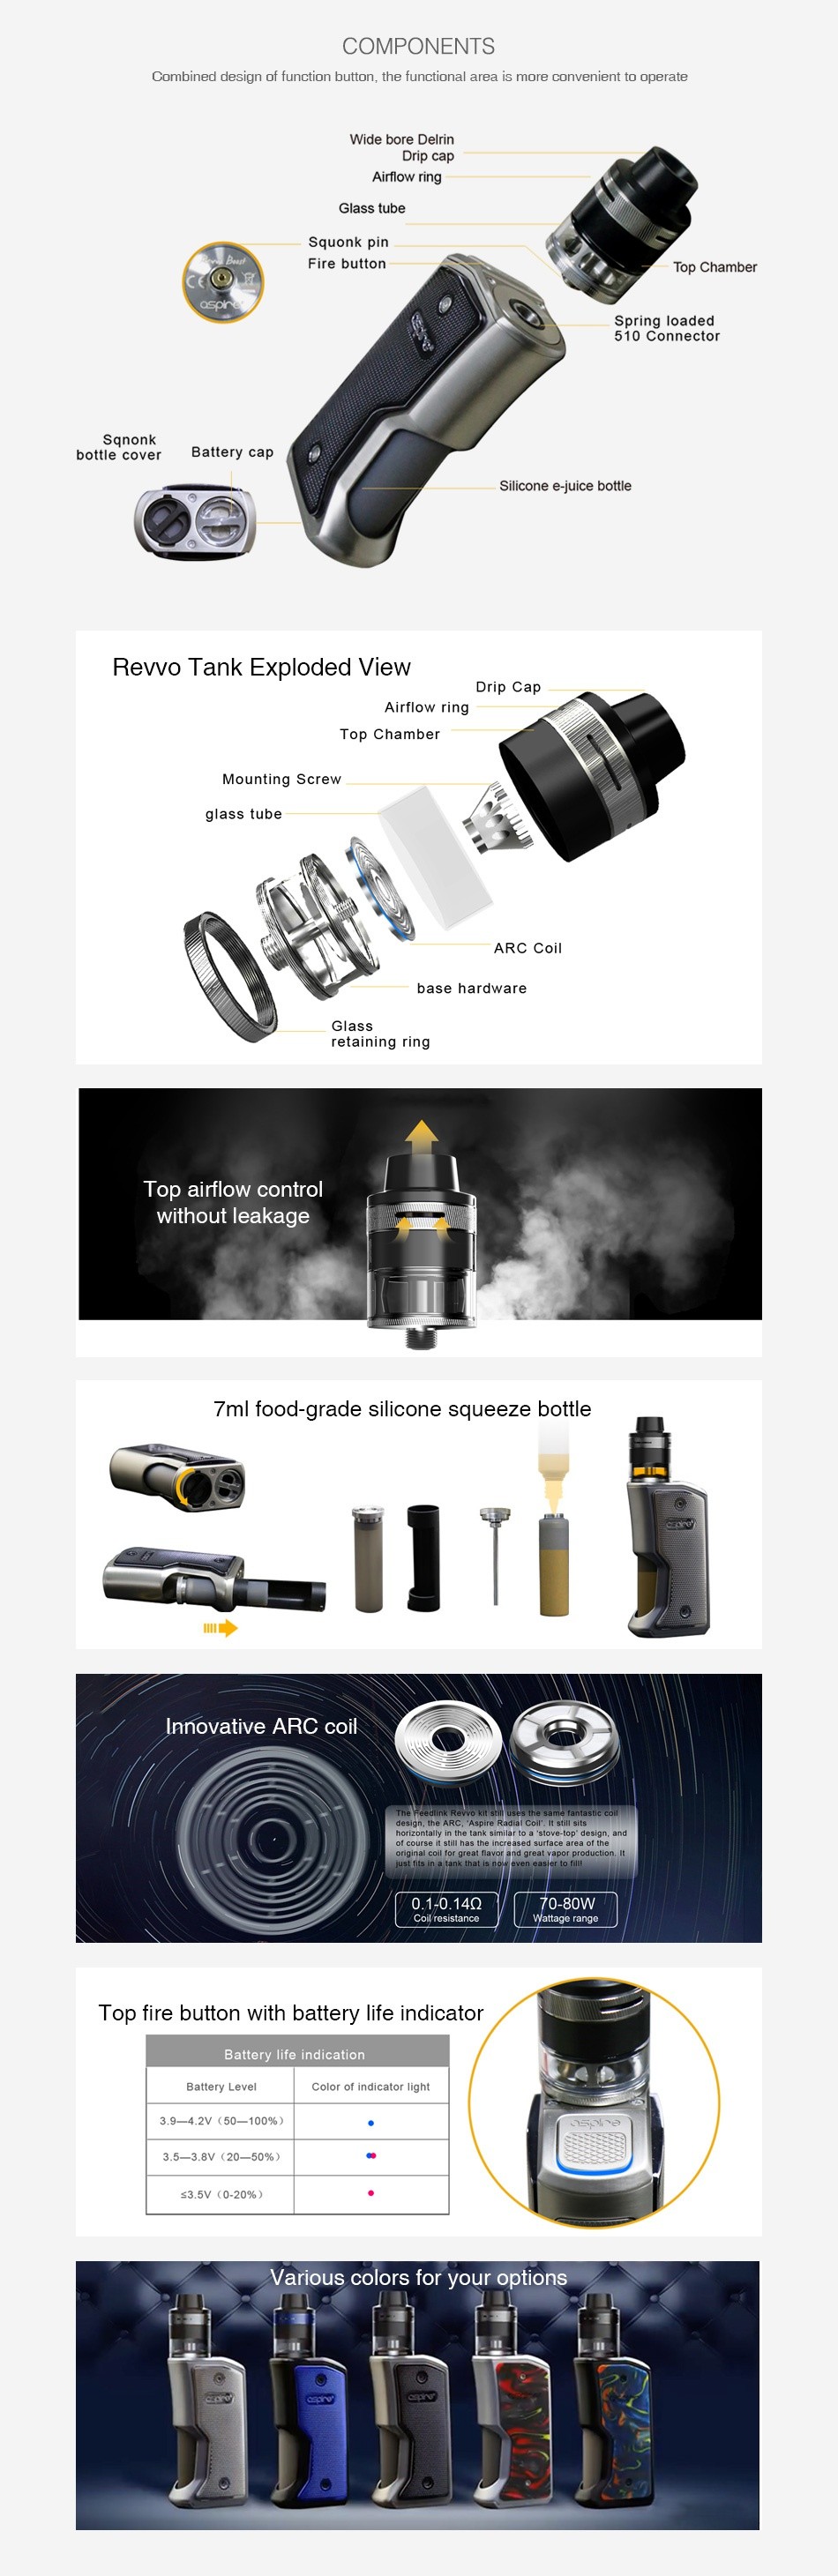 Aspire Feedlink Revvo Squonk Kit COMPONENTS Combined des gn of function button  the functional area is more conven ent to operat bottle cover Battery ca Revo Tank Exploded i base hard taining ring T ithaut leak 7ml food grade silicone squeeze bottle 0 1 0 14Q Top fire button with battery life indicator ColOr of ar dicate  I g 3 9 4 2Y 50 105  3 5 3Bv 20 50   3 5v0 20  Various colors for your options